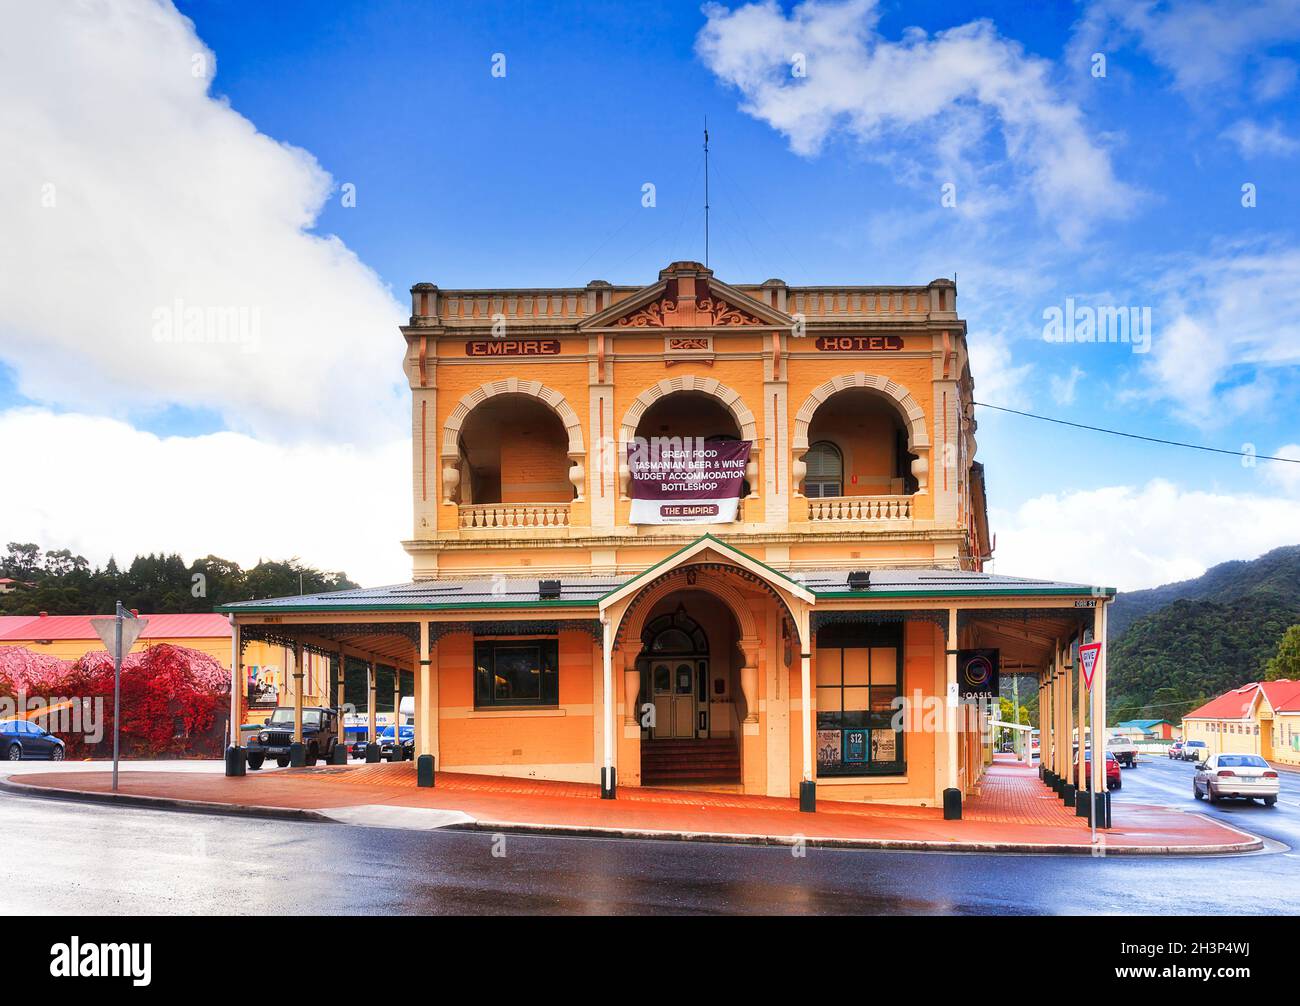 Queenstown, Australia - 24 April 2014: Facade of historic Empire hotel in old mining town on Tasmanian West coast under blue sky. Stock Photo